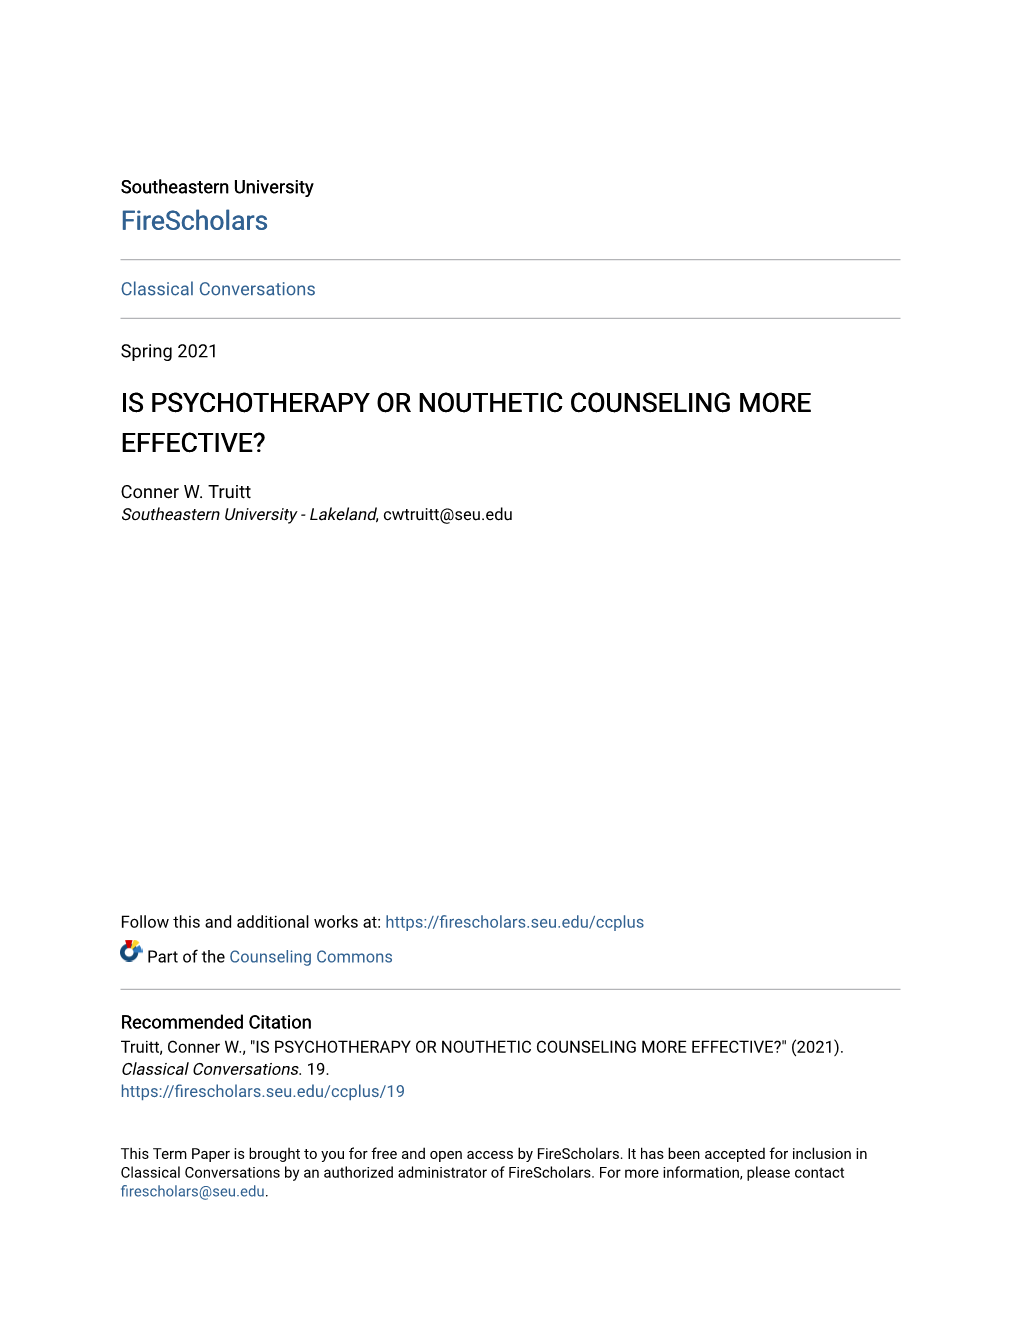 Is Psychotherapy Or Nouthetic Counseling More Effective?